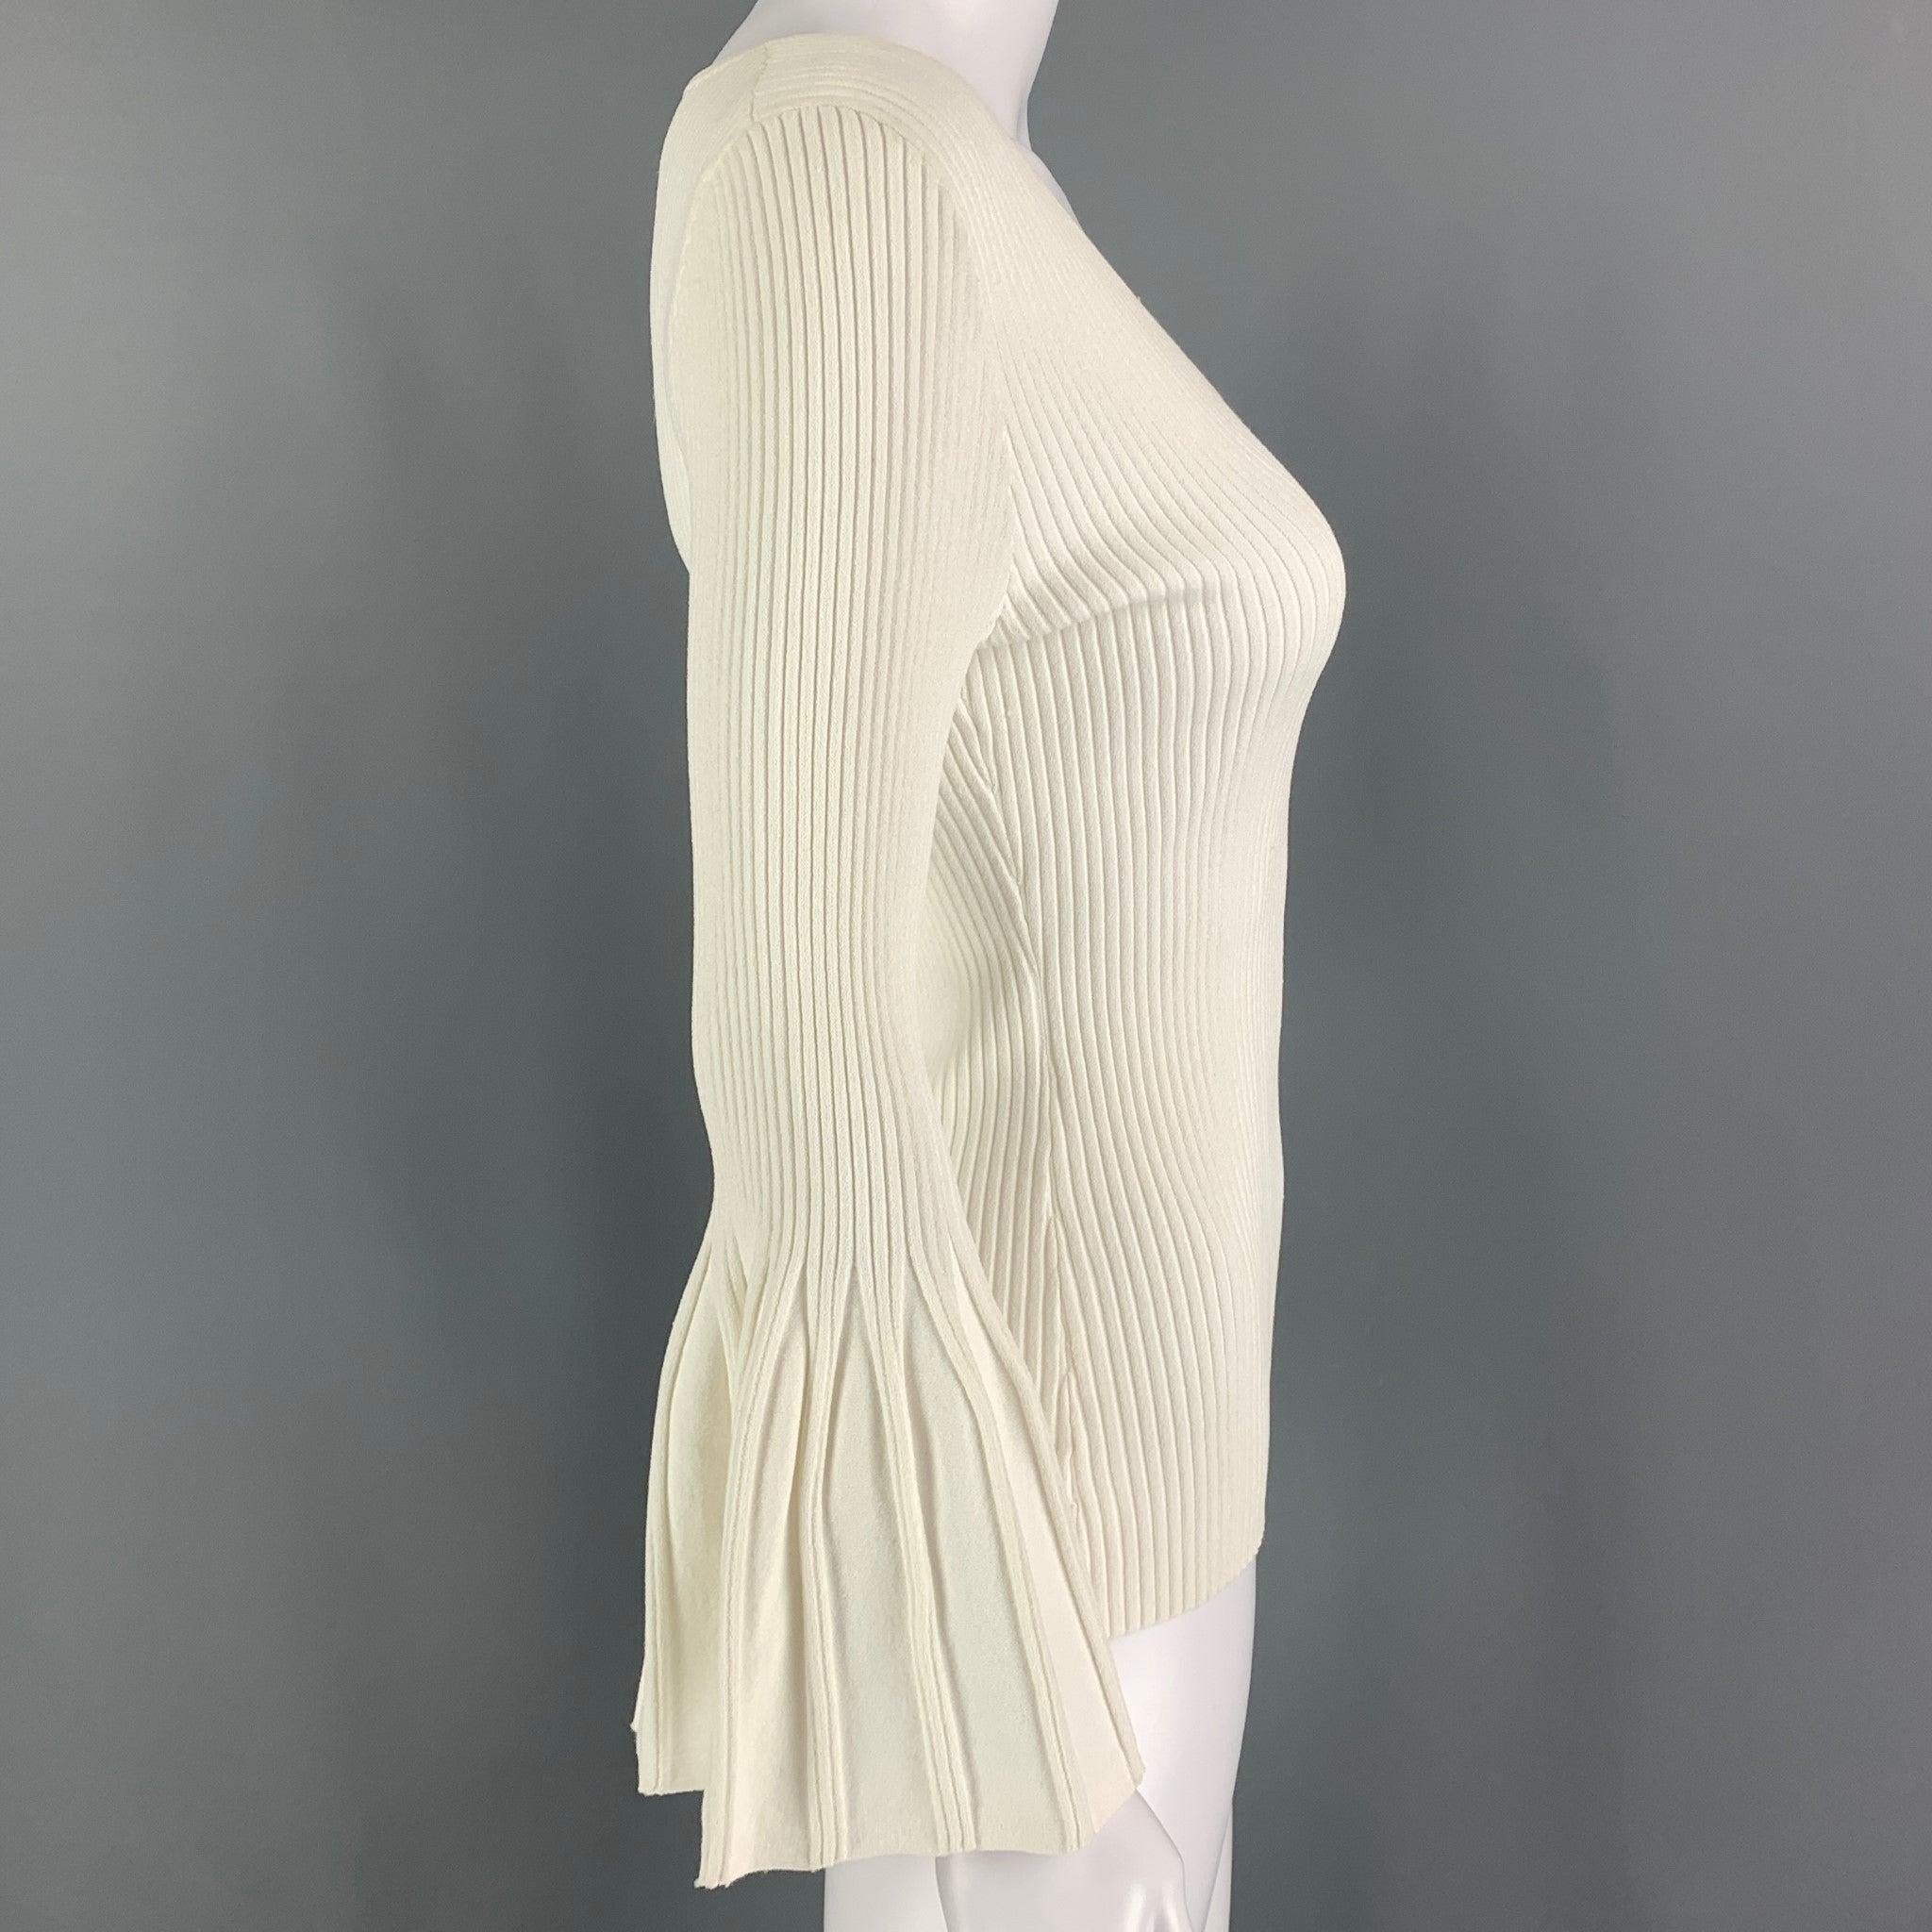 CAROLINA HERRERA top comes in a white stretch ribbed viscose / polyester featuring flared sleeves and a v-neck.
Very Good
Pre-Owned Condition. 

Marked:   M/M 

Measurements: 
 
Shoulder: 15 inches Bust:
26 inches Sleeve: 21 inches Length: 23 inches